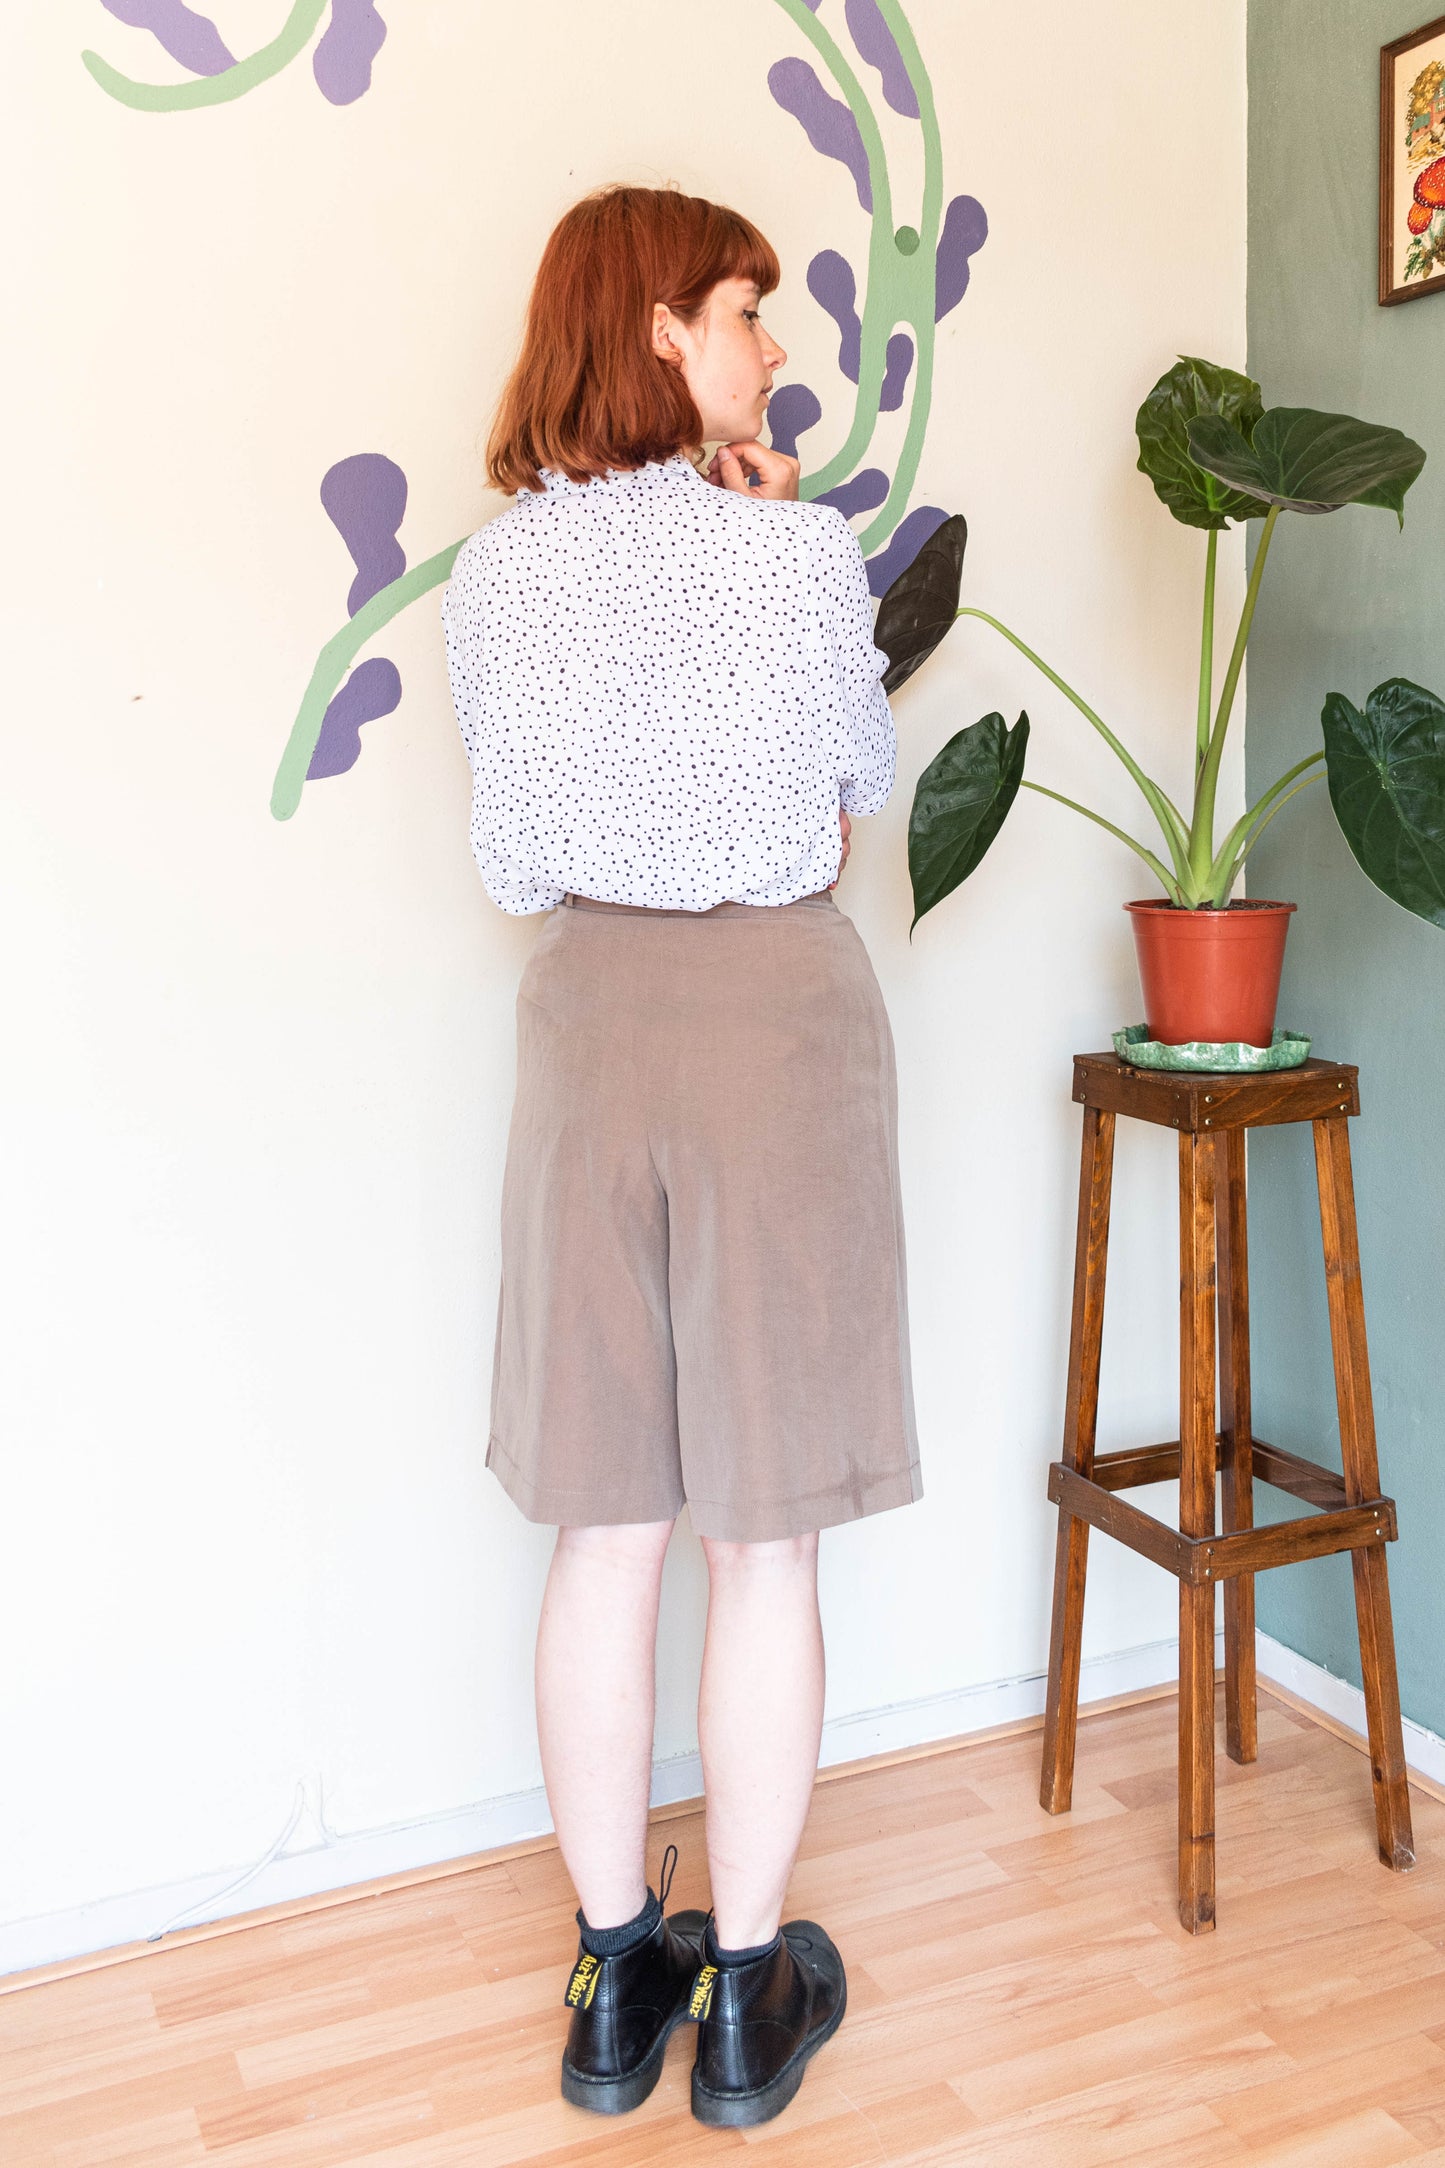 NEW IN! Light brown shorts